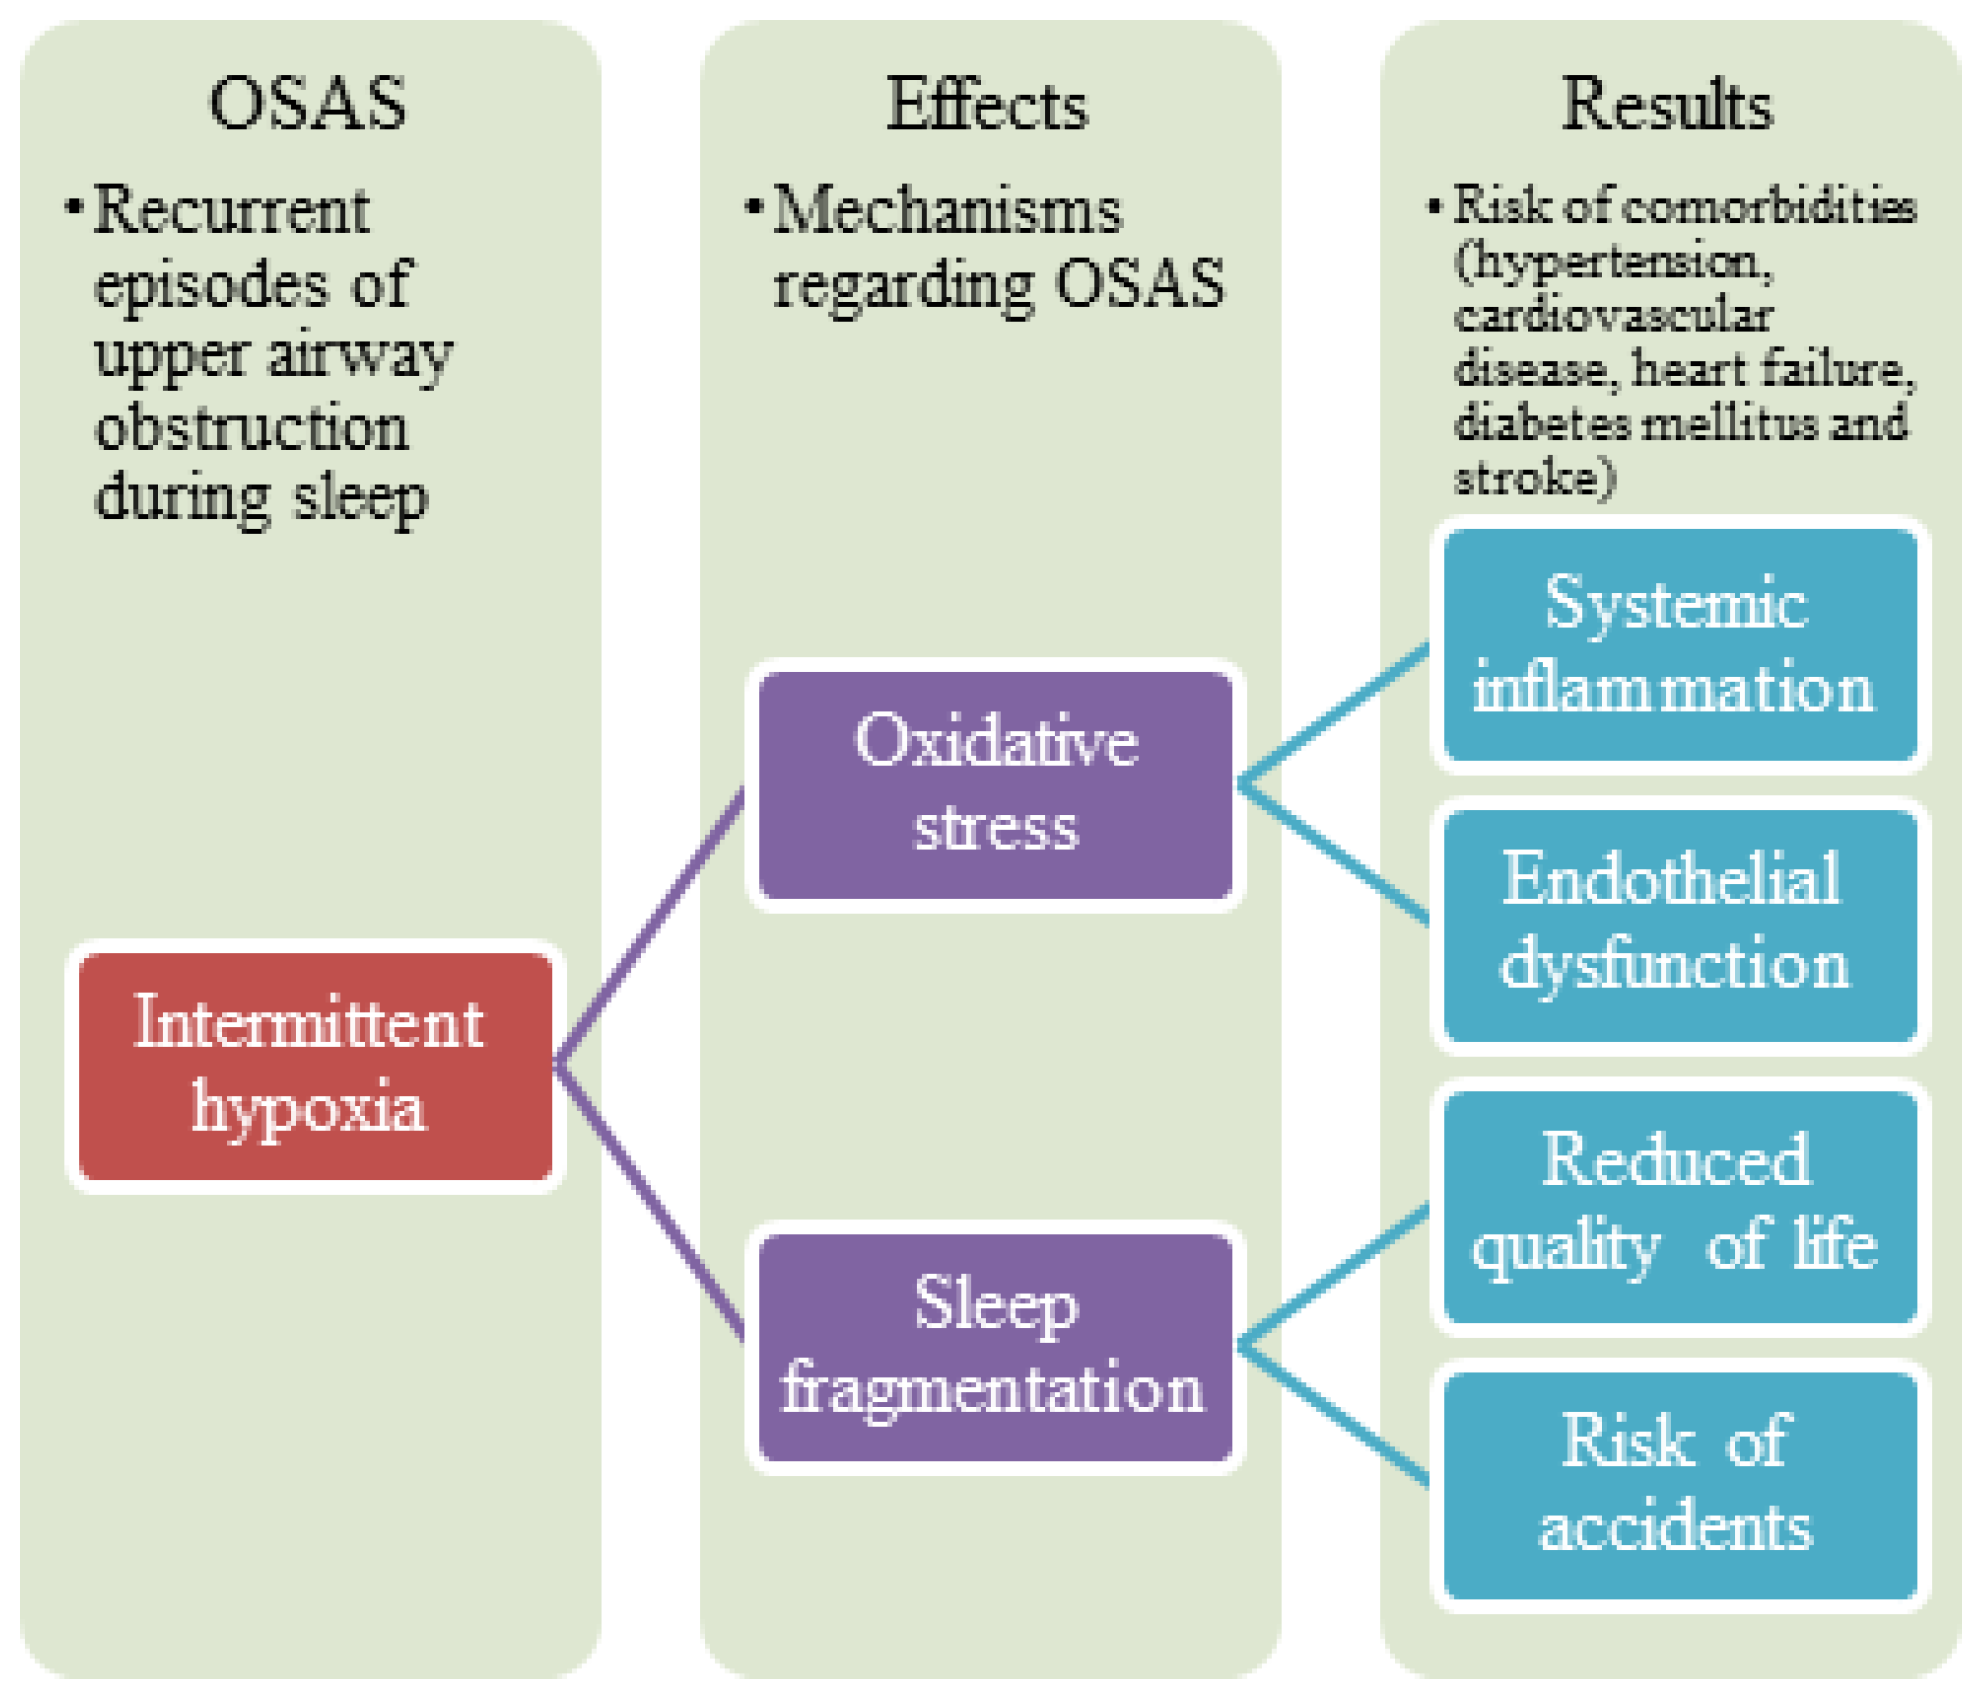 Digital Health and Sleep-Disordered Breathing: A Systematic Review